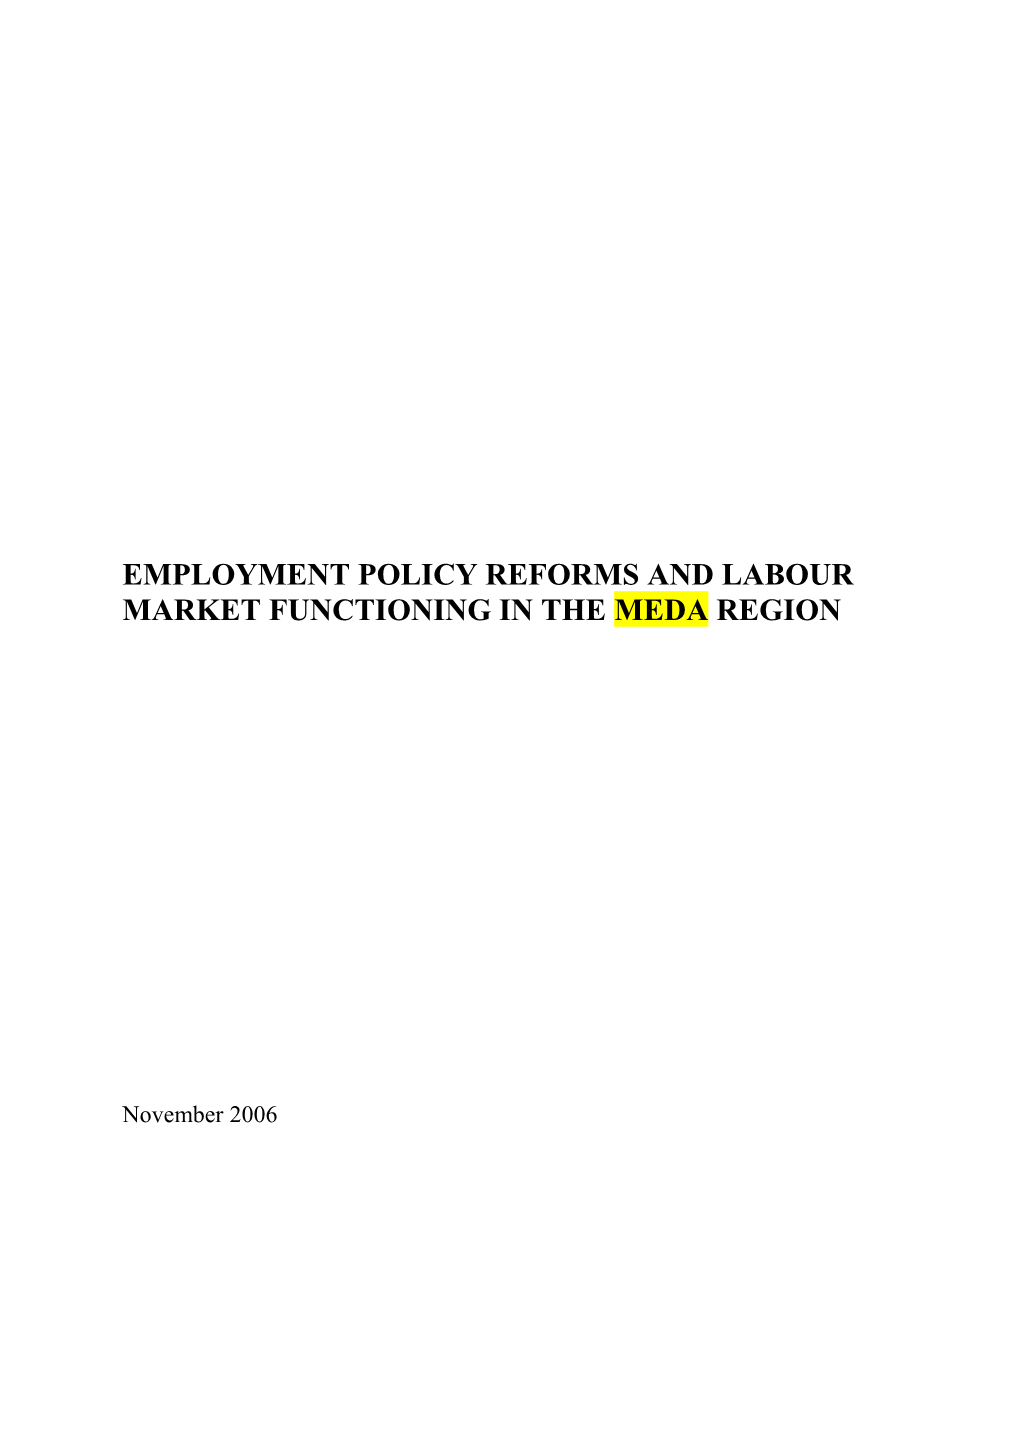 The Functioning of the Labour Markets in the Mediterranean Region and the Implications s1